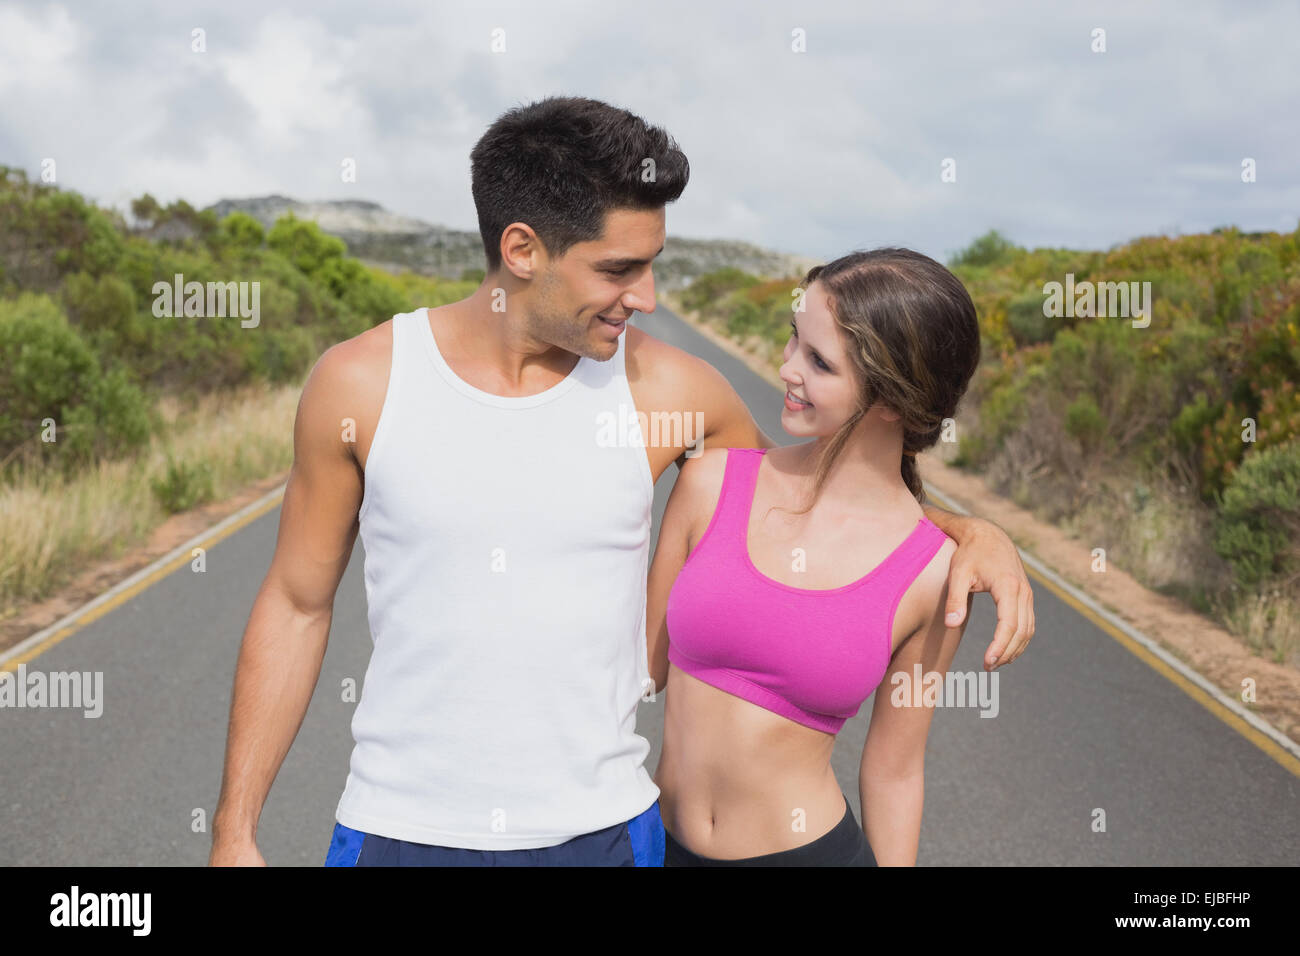 Fit couple standing on the open road Stock Photo